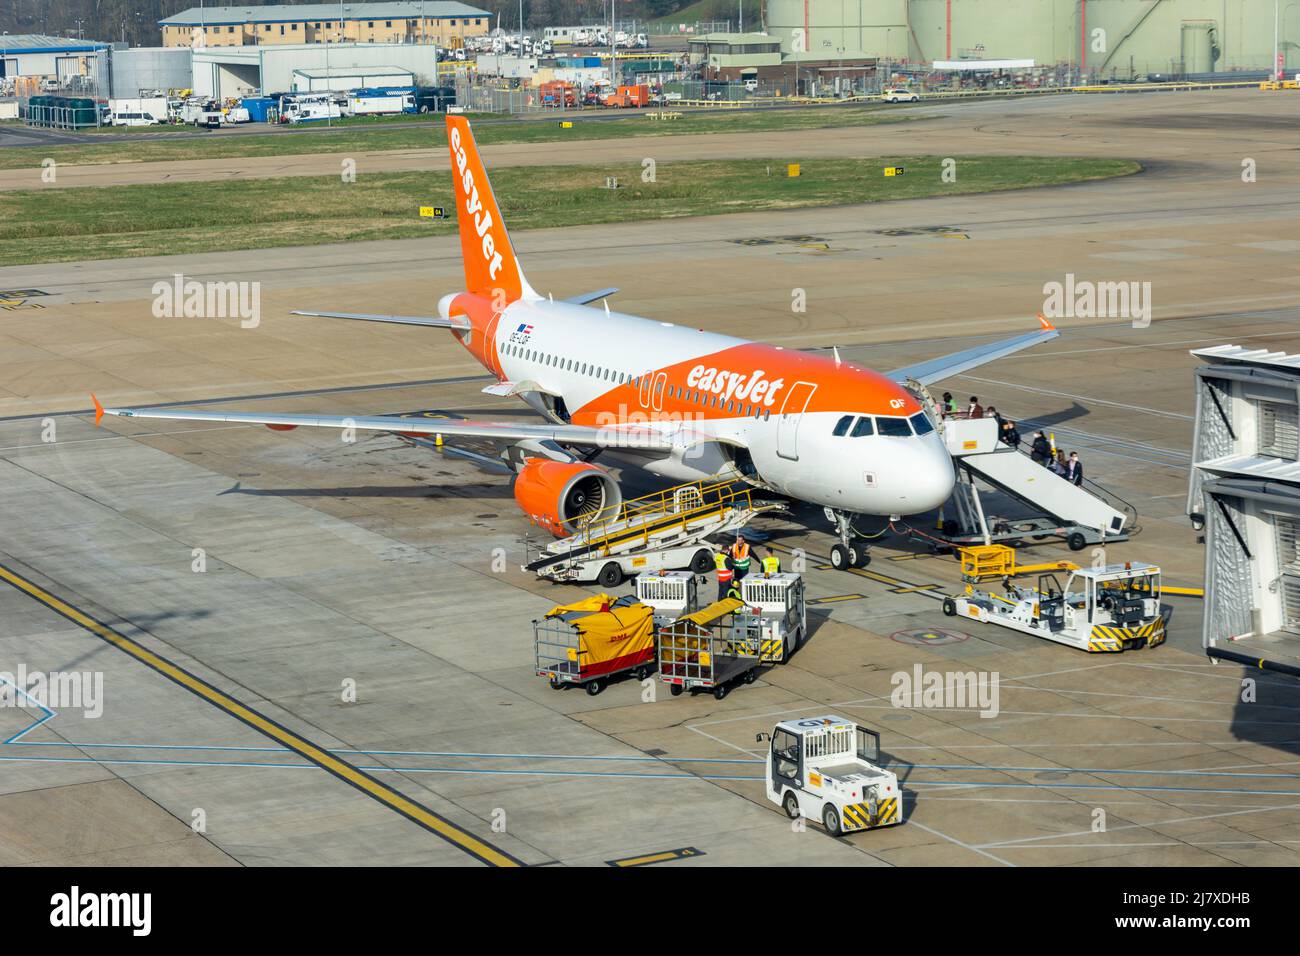 Passengers boarding Easyjet Airbus A319-111 flight at North Terminal, London Gatwick Airport, Crawley, West Sussex, England, United Kingdom Stock Photo